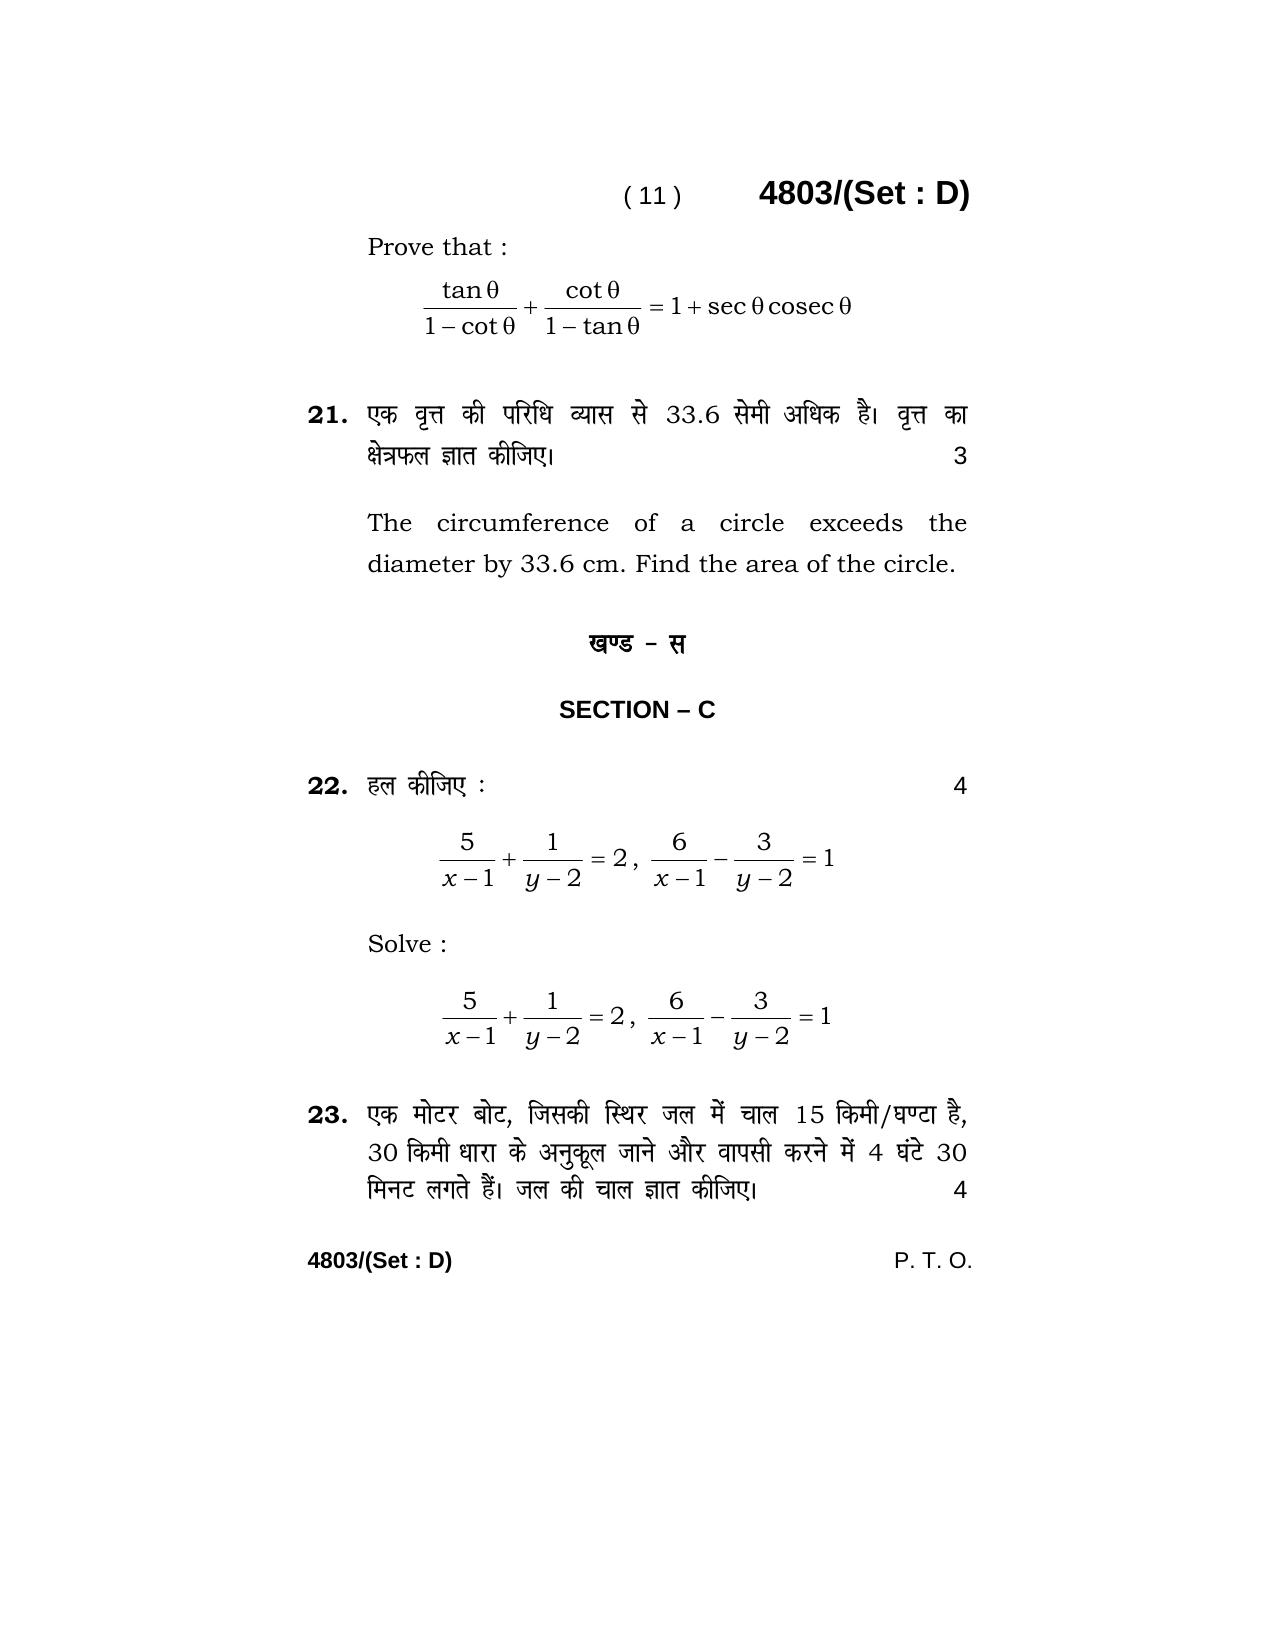 Haryana Board HBSE Class 10 Mathematics 2020 Question Paper - Page 59